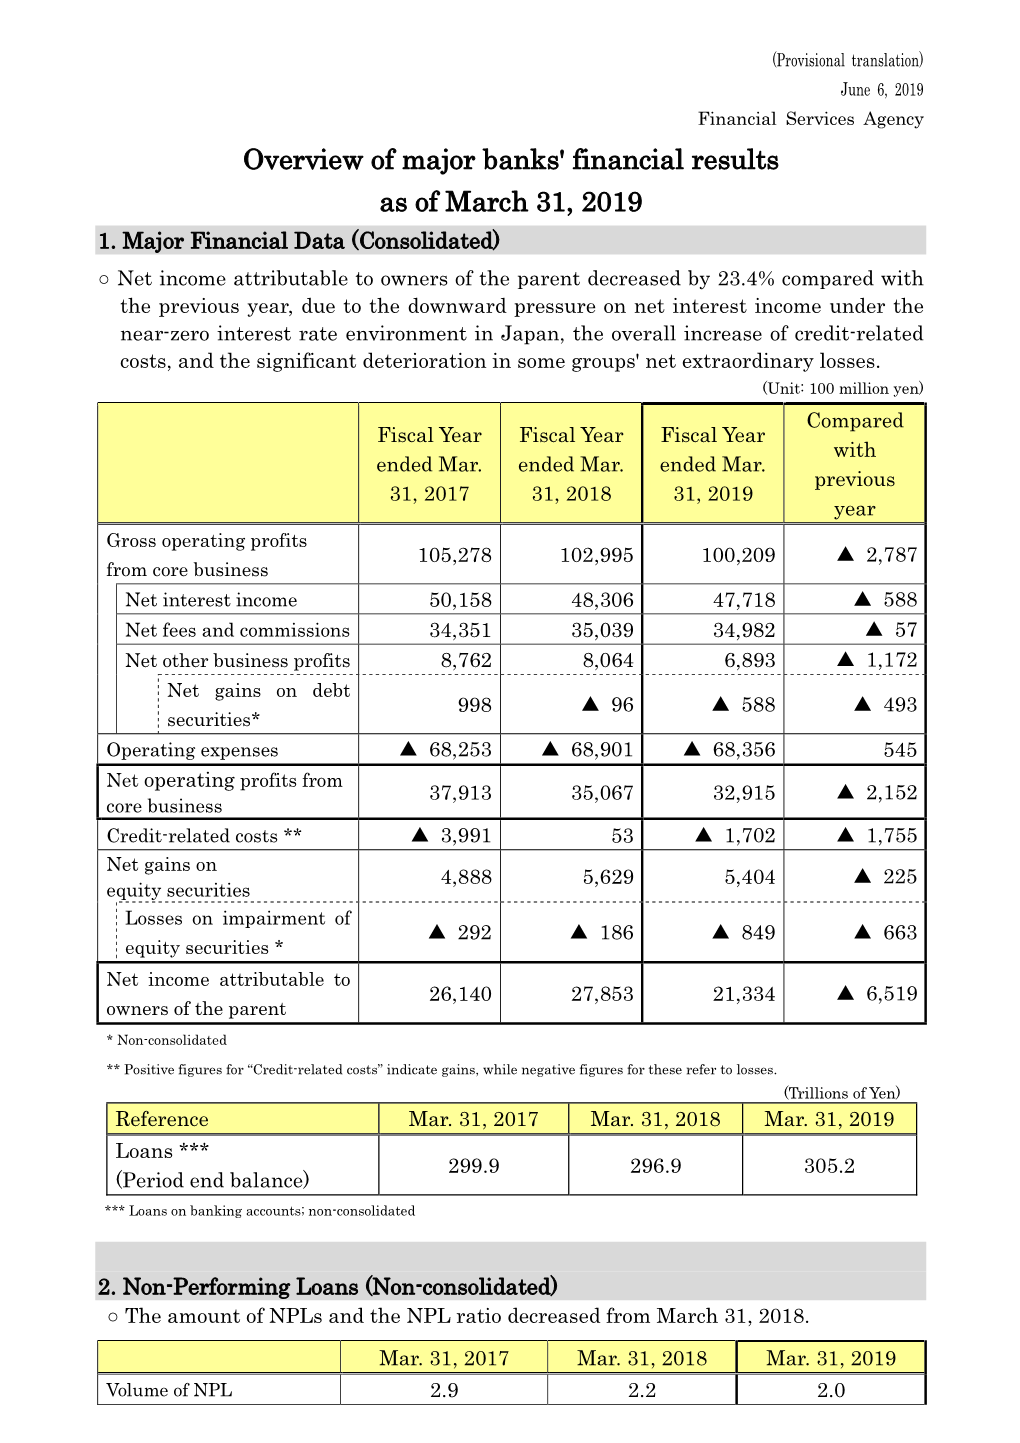 Overview of Major Banks' Financial Results As of March 31, 2019 (PDF